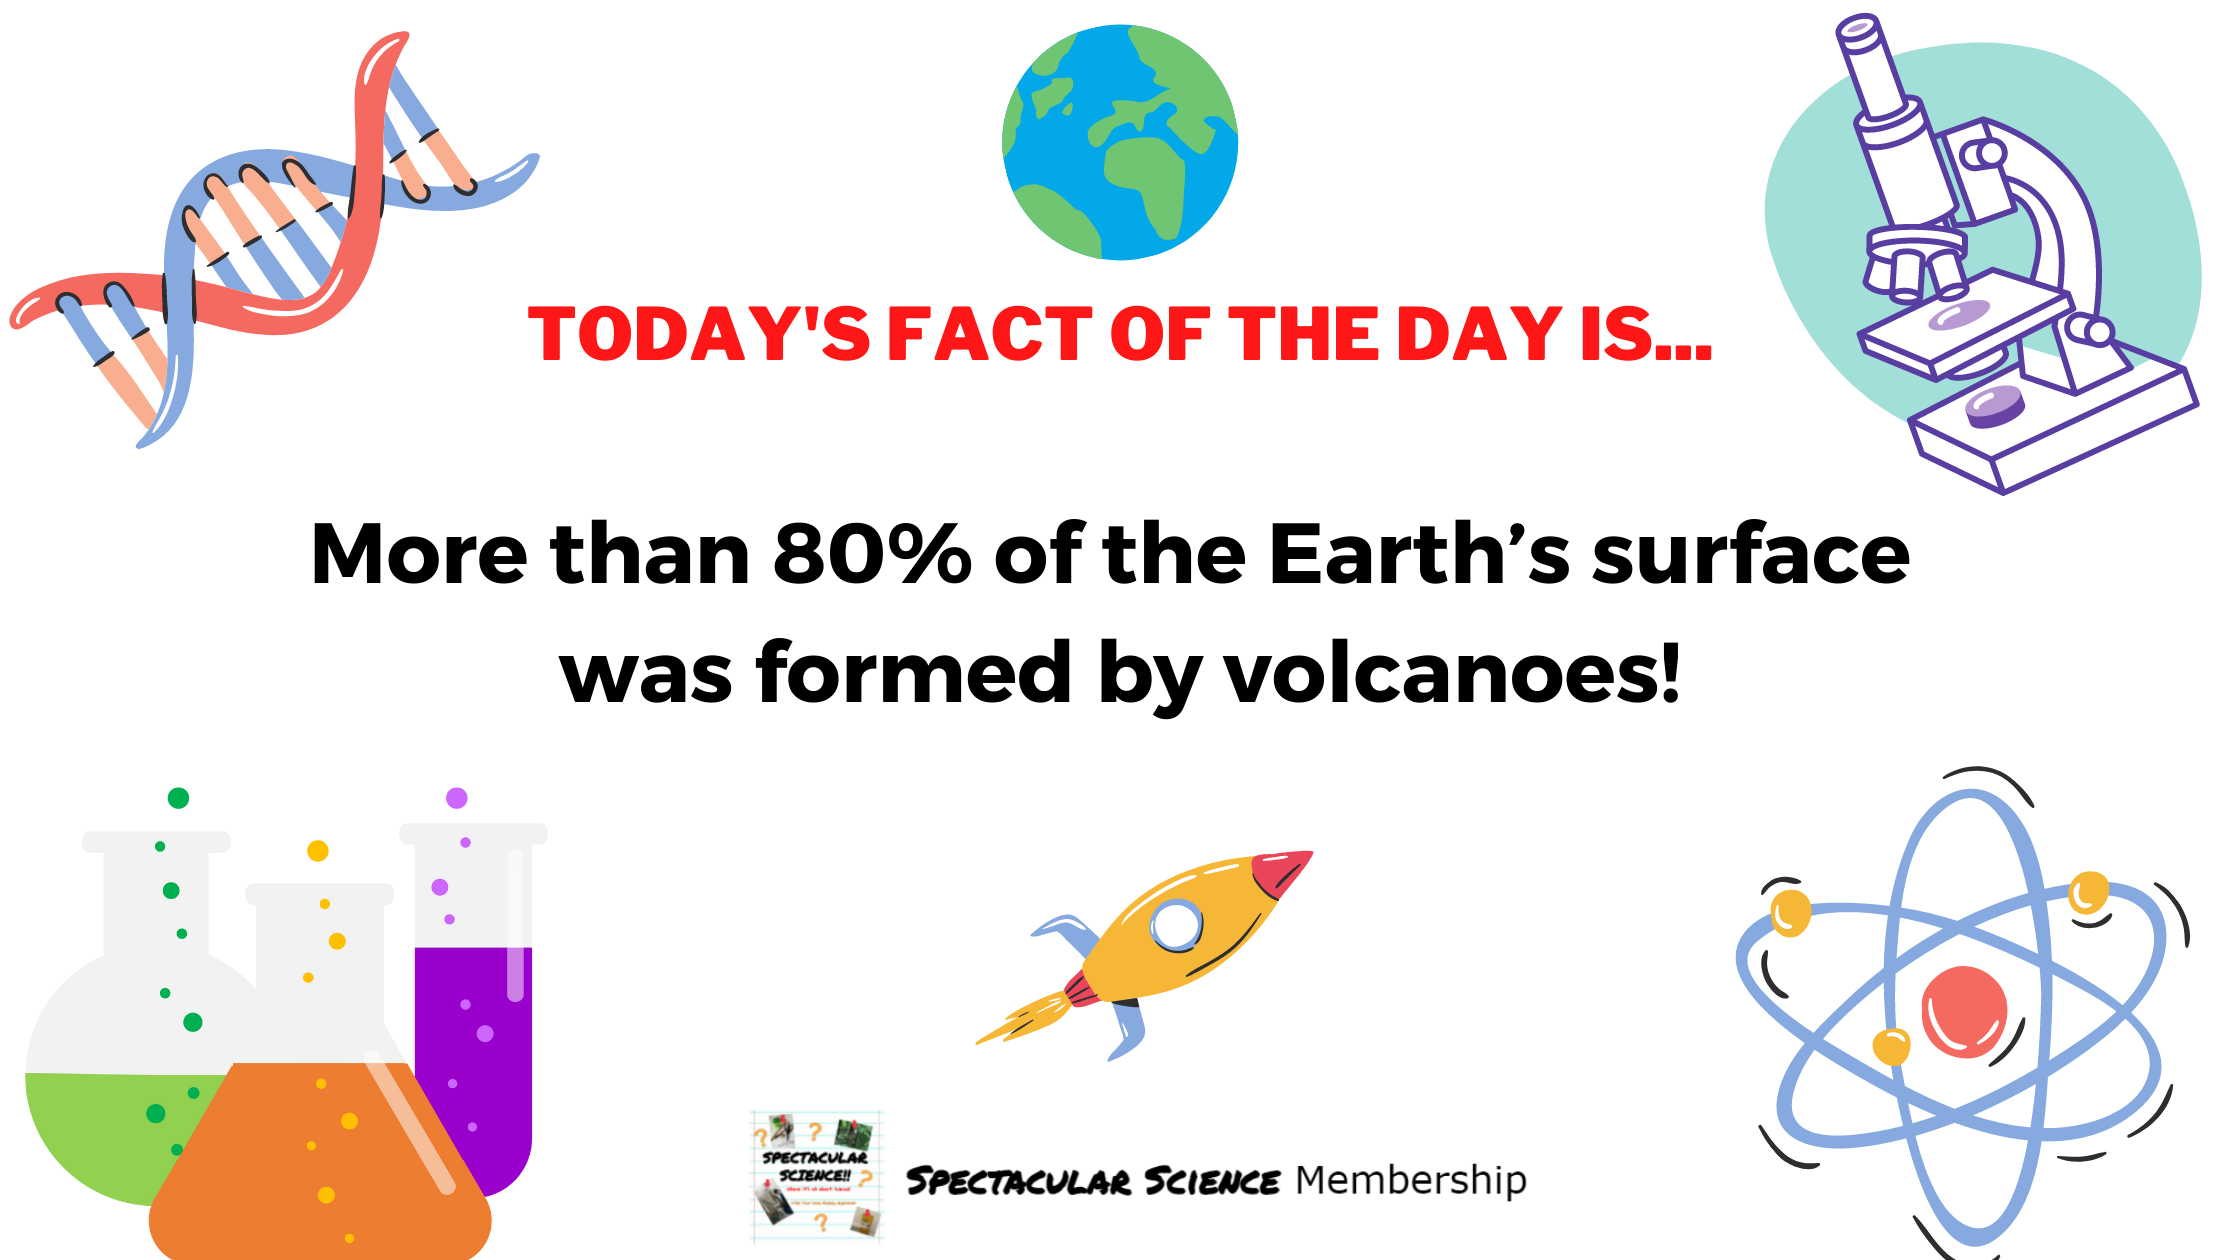 Fact of the Day Image Jan. 4th